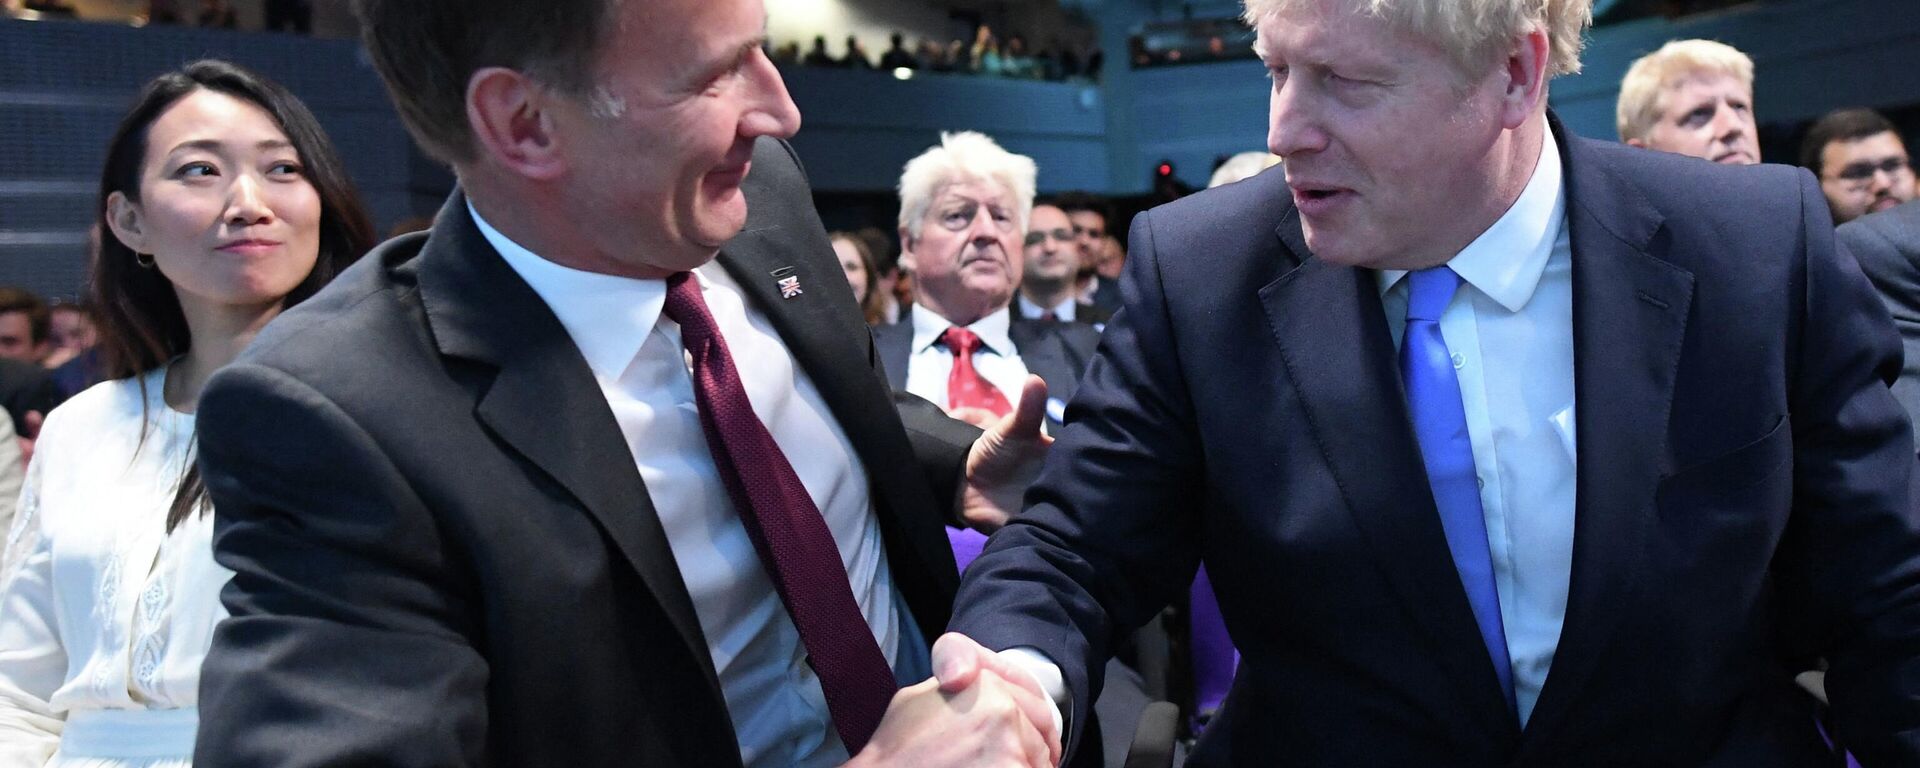 Leadership contender Jeremy Hunt (L) shakes hands to congratulate new Conservative Party leader and incoming prime minister Boris Johnson (R) as the results of the leadership contest are announced at an event in central London on July 23, 2019 - Sputnik International, 1920, 08.06.2022